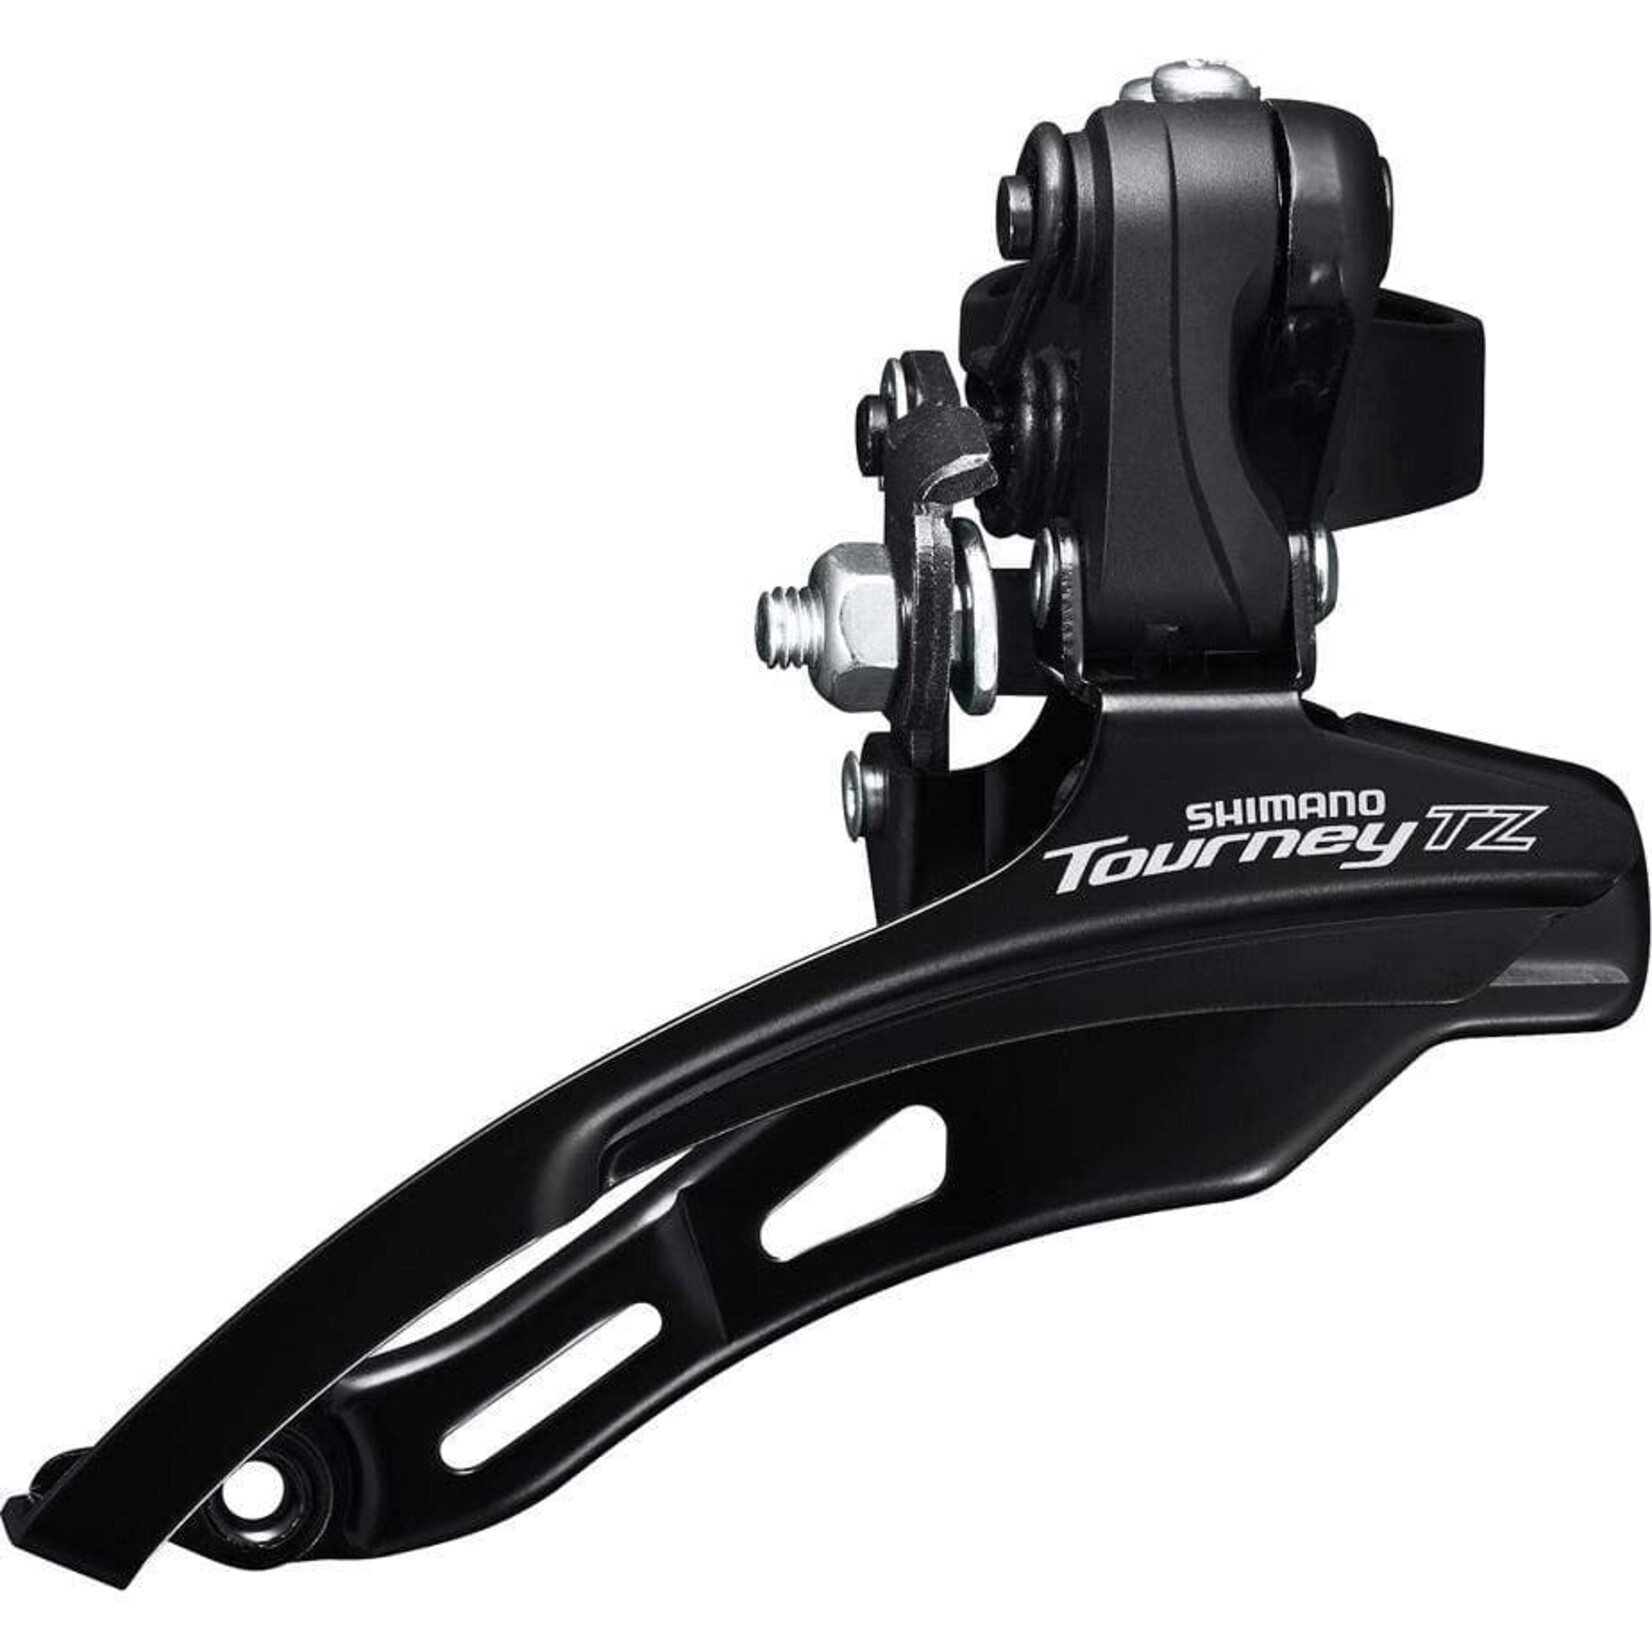 Shimano Tourney / TY Shimano FD-TZ510 6-speed MTB front derailleur, down swing, top pull, 28.6mm, 66-69, 48T